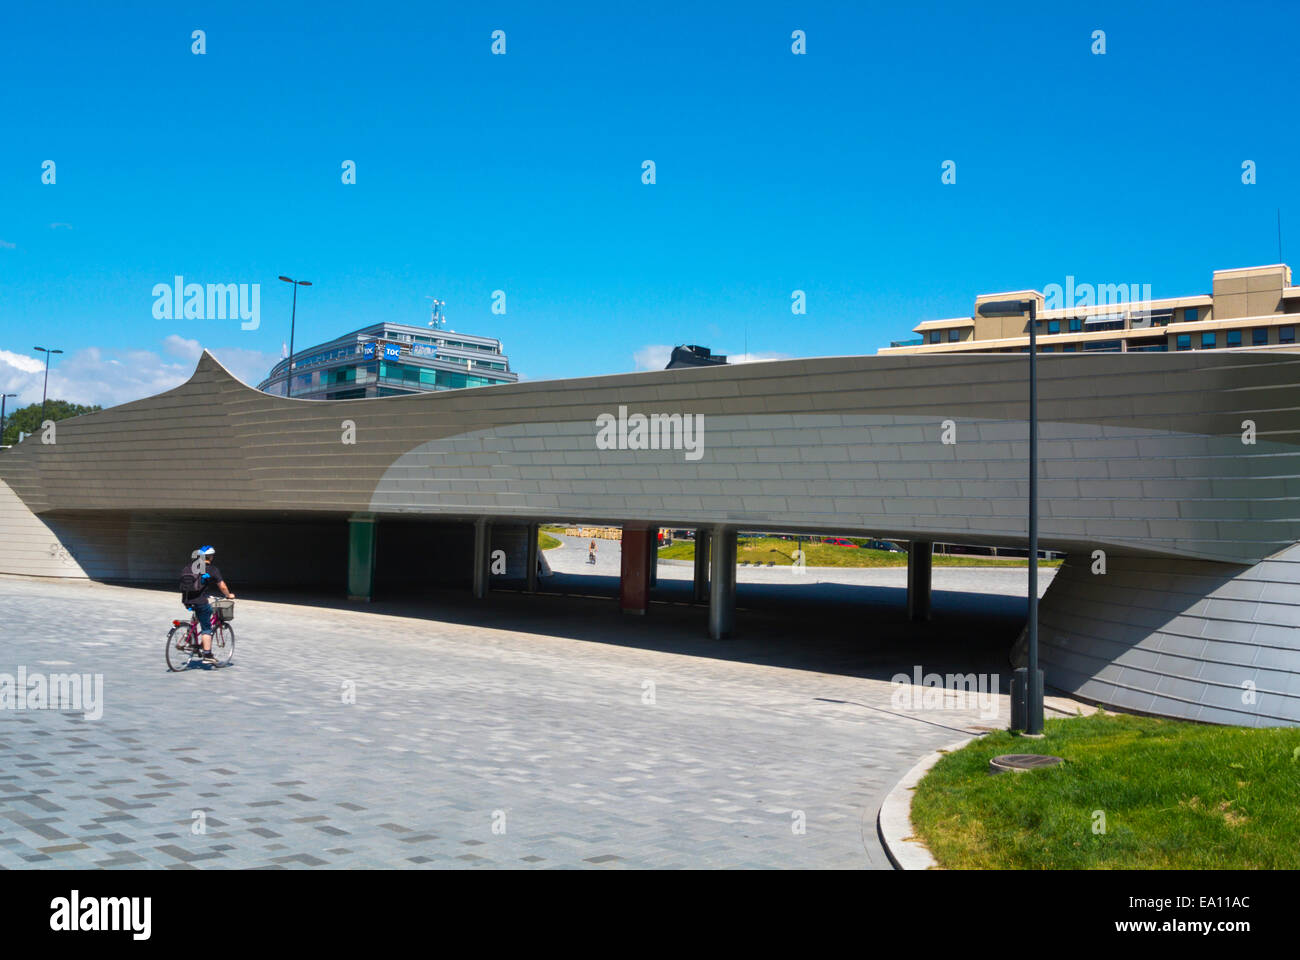 Underpass for pedestrians and bicycles, Ruoholahti district, Helsinki, Finland, Europe Stock Photo